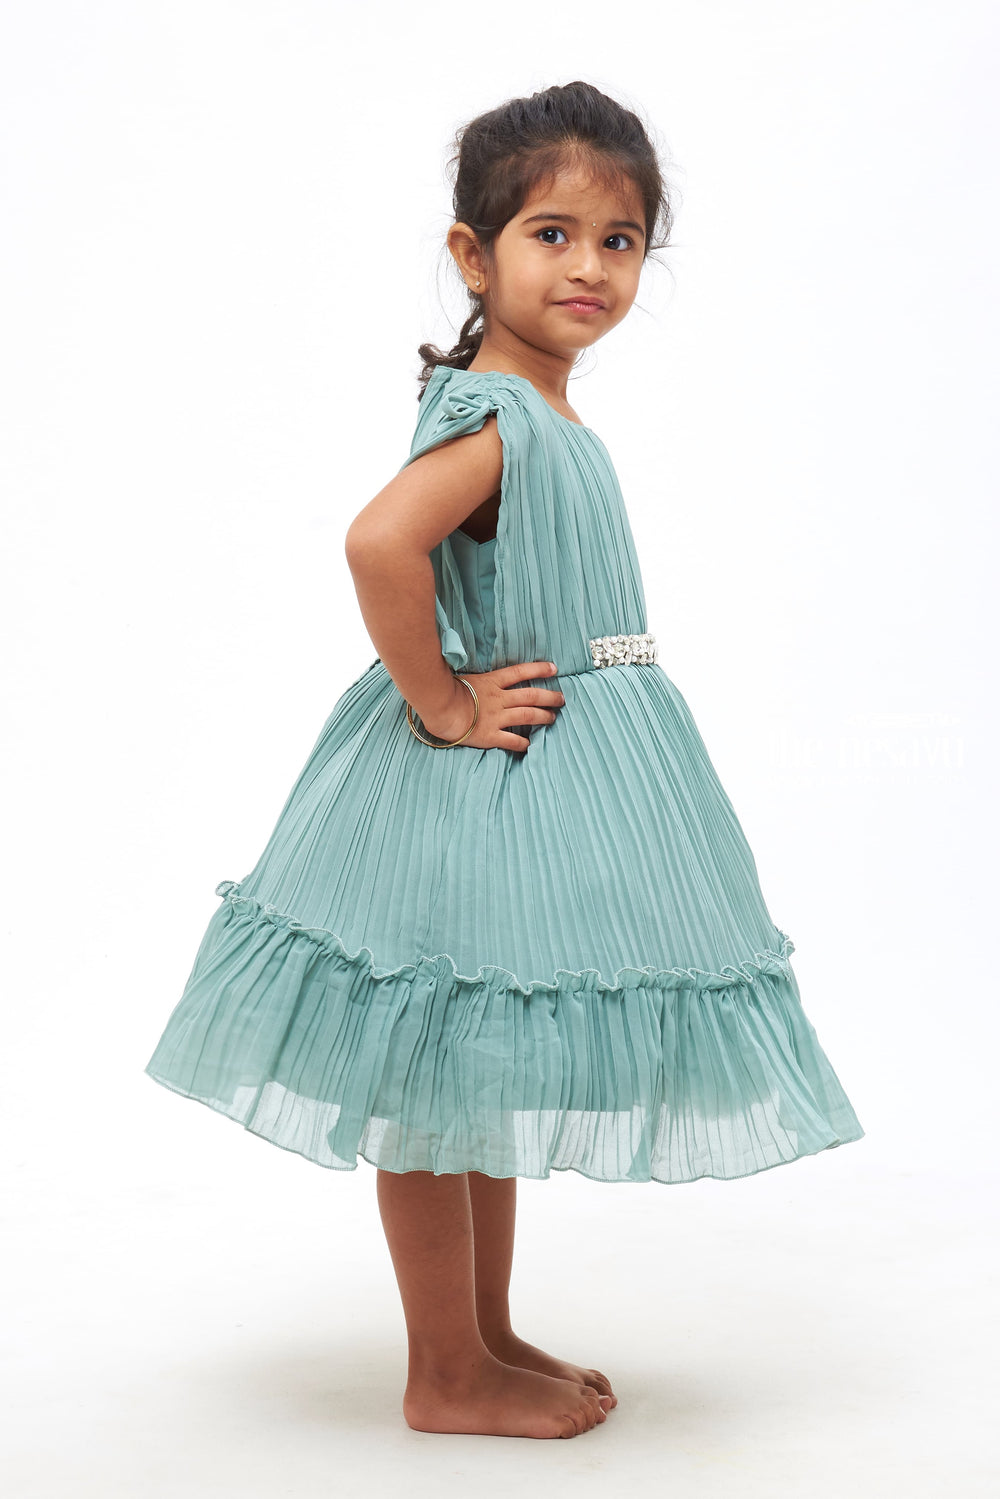 The Nesavu Girls Fancy Party Frock Girls Emerald Green Pleated Georgette Party Dress with Contemporary Poncho Sleeves Nesavu Princess-Inspired Girls Party Dresses | Sparkle and Shine | The Nesavu